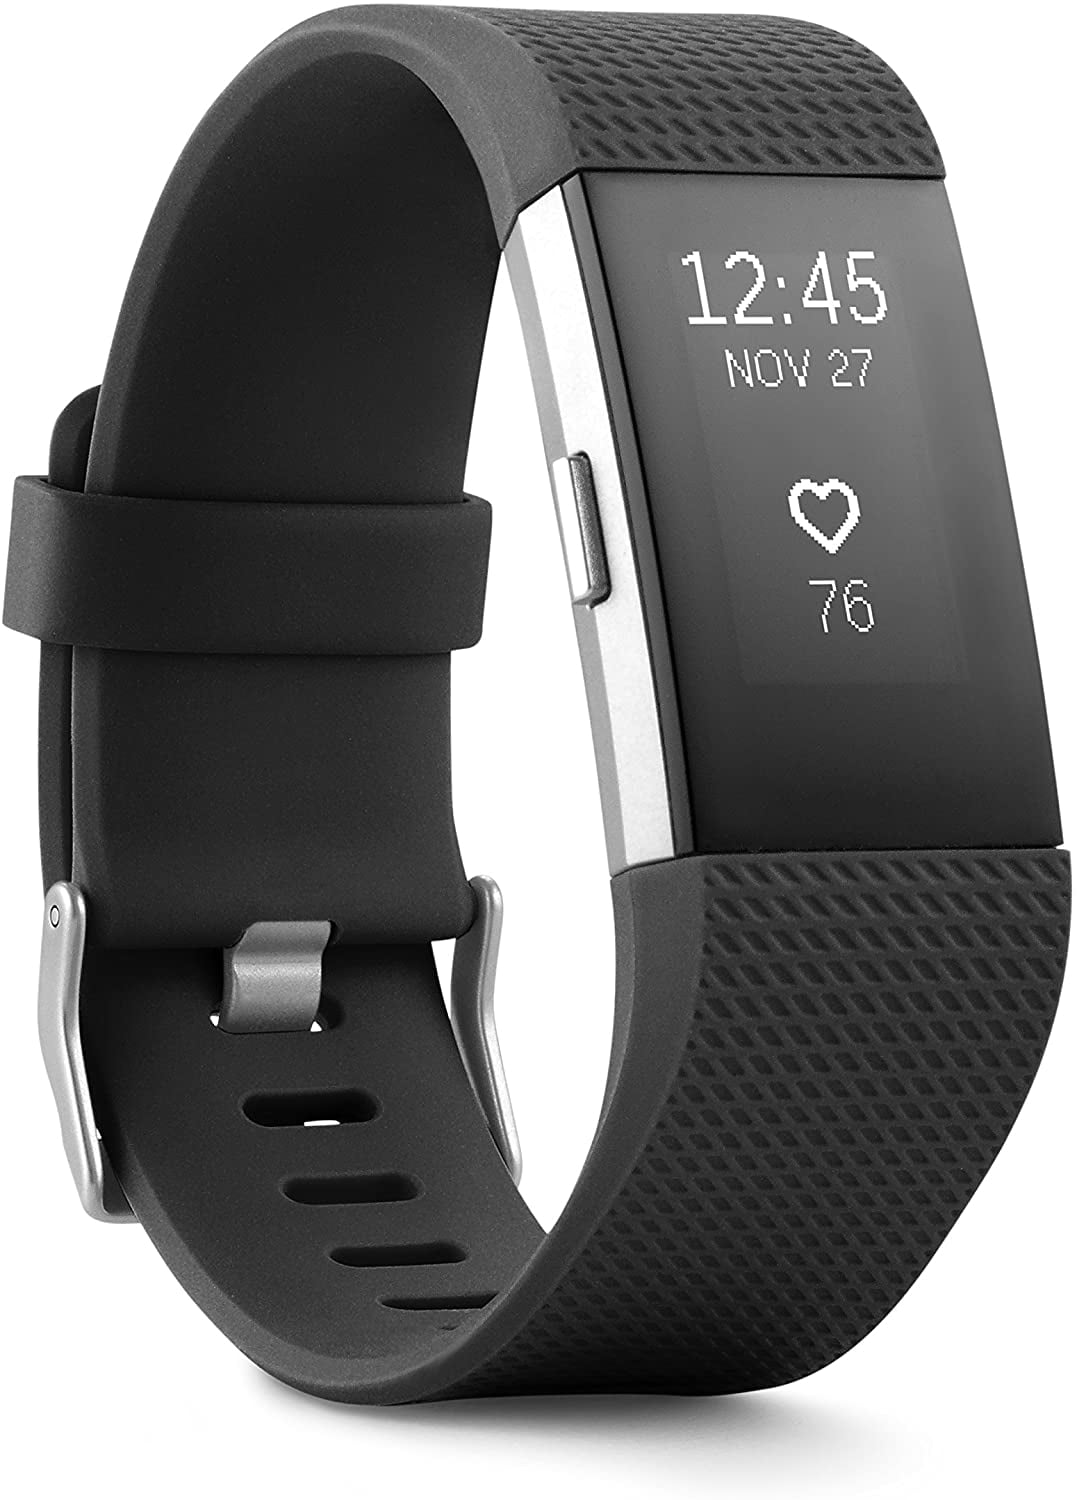 Small Black US Version Fitness Wristband Fitbit Charge 2 Heart Rate 